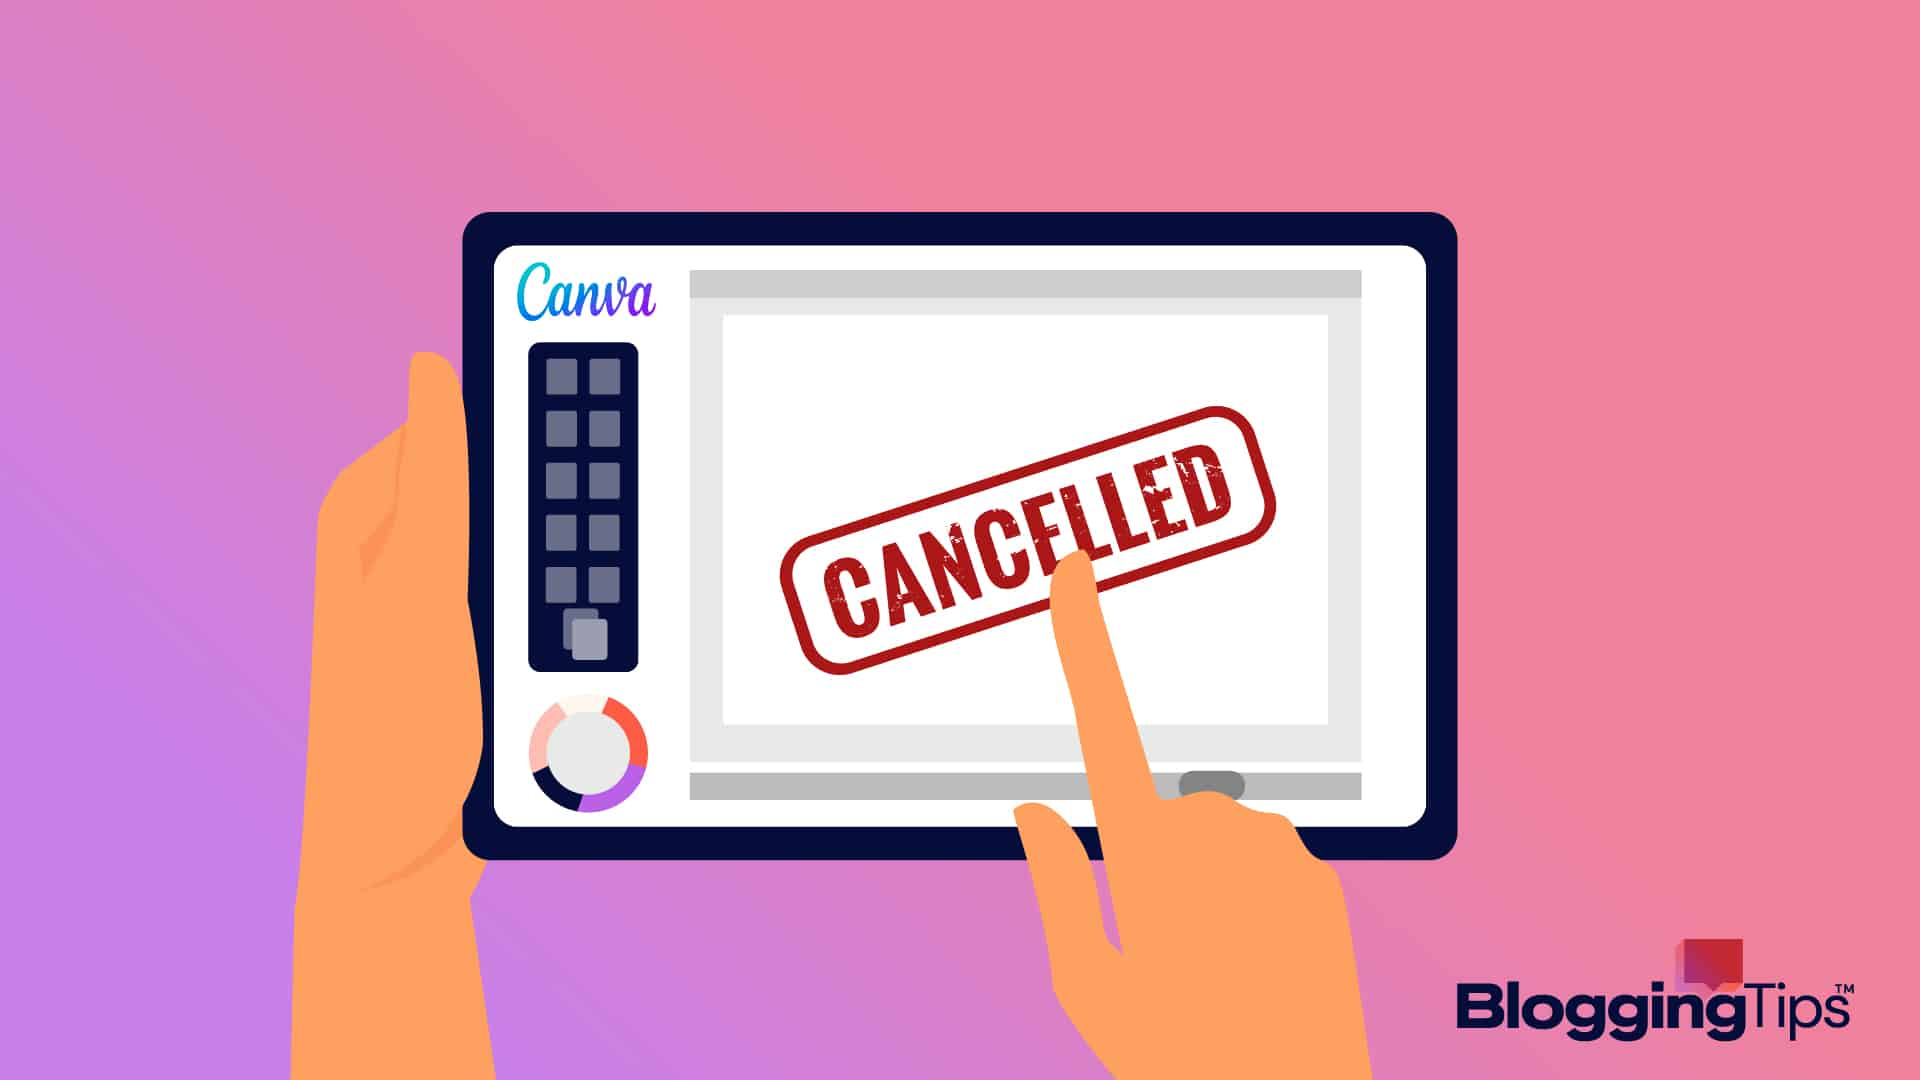 vector graphic showing an illustration of how to cancel canva subscription